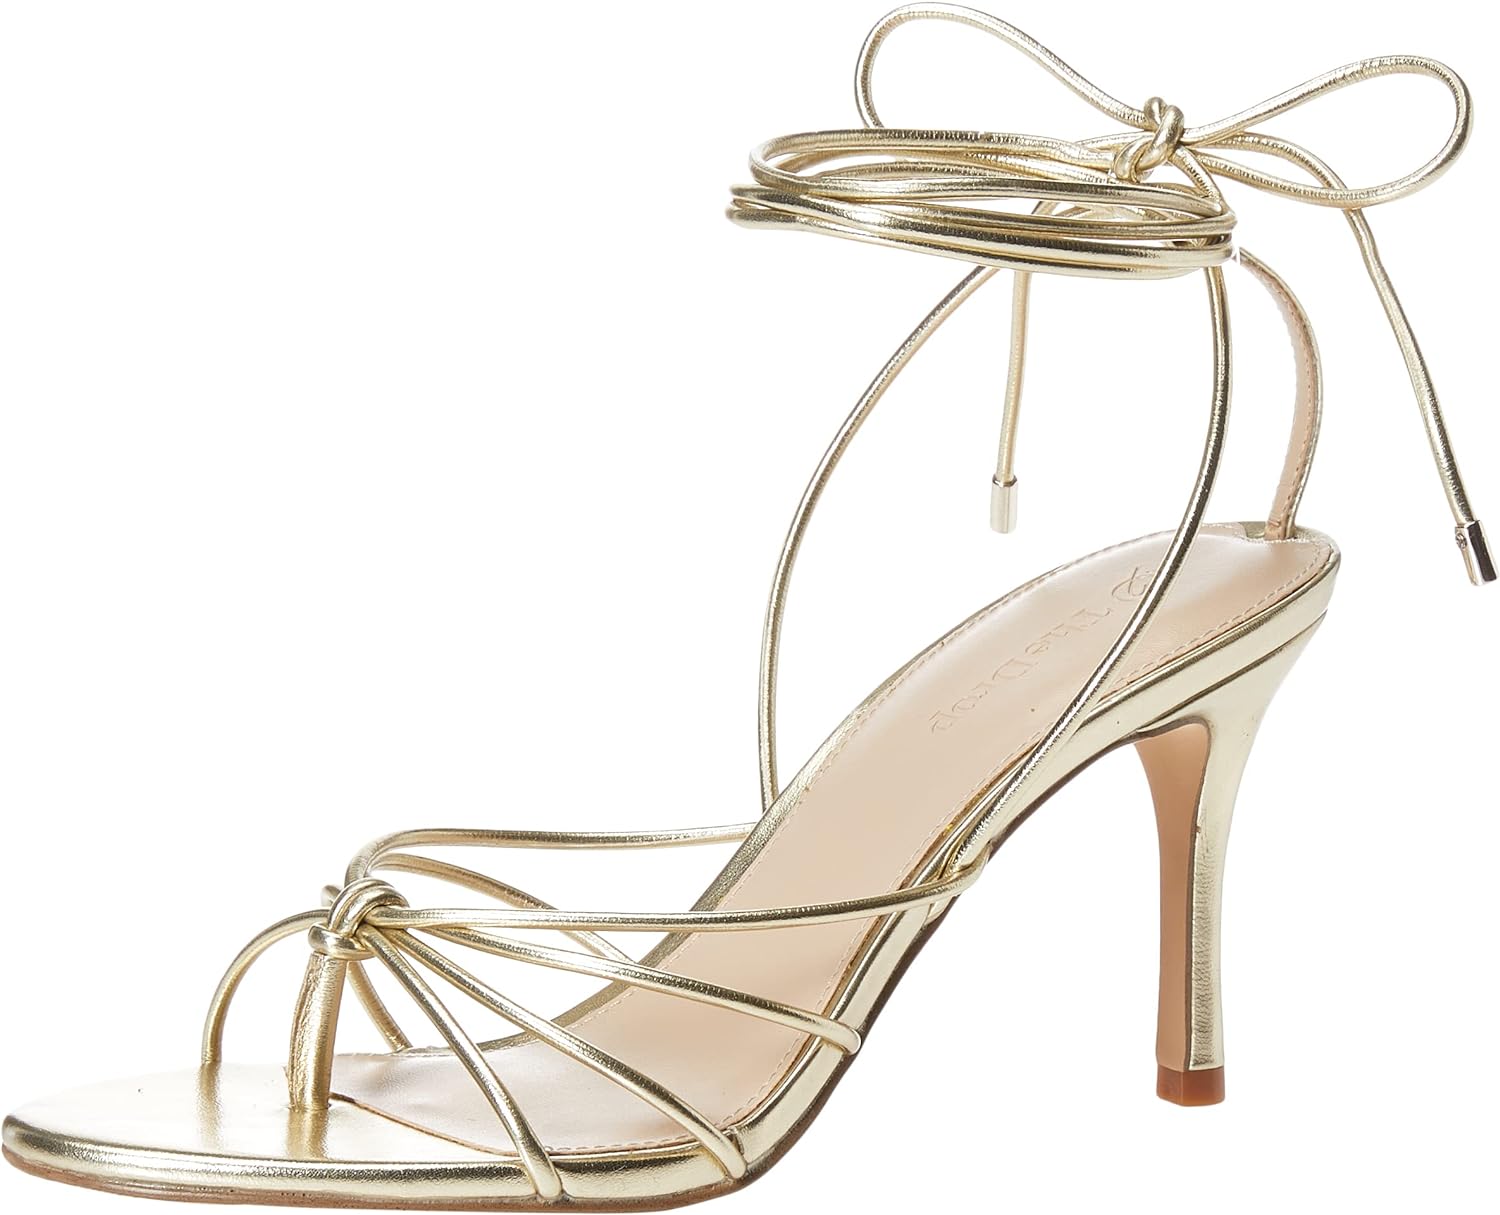 The Drop Women' Archie Lace-Up Strappy Heeled Sandal